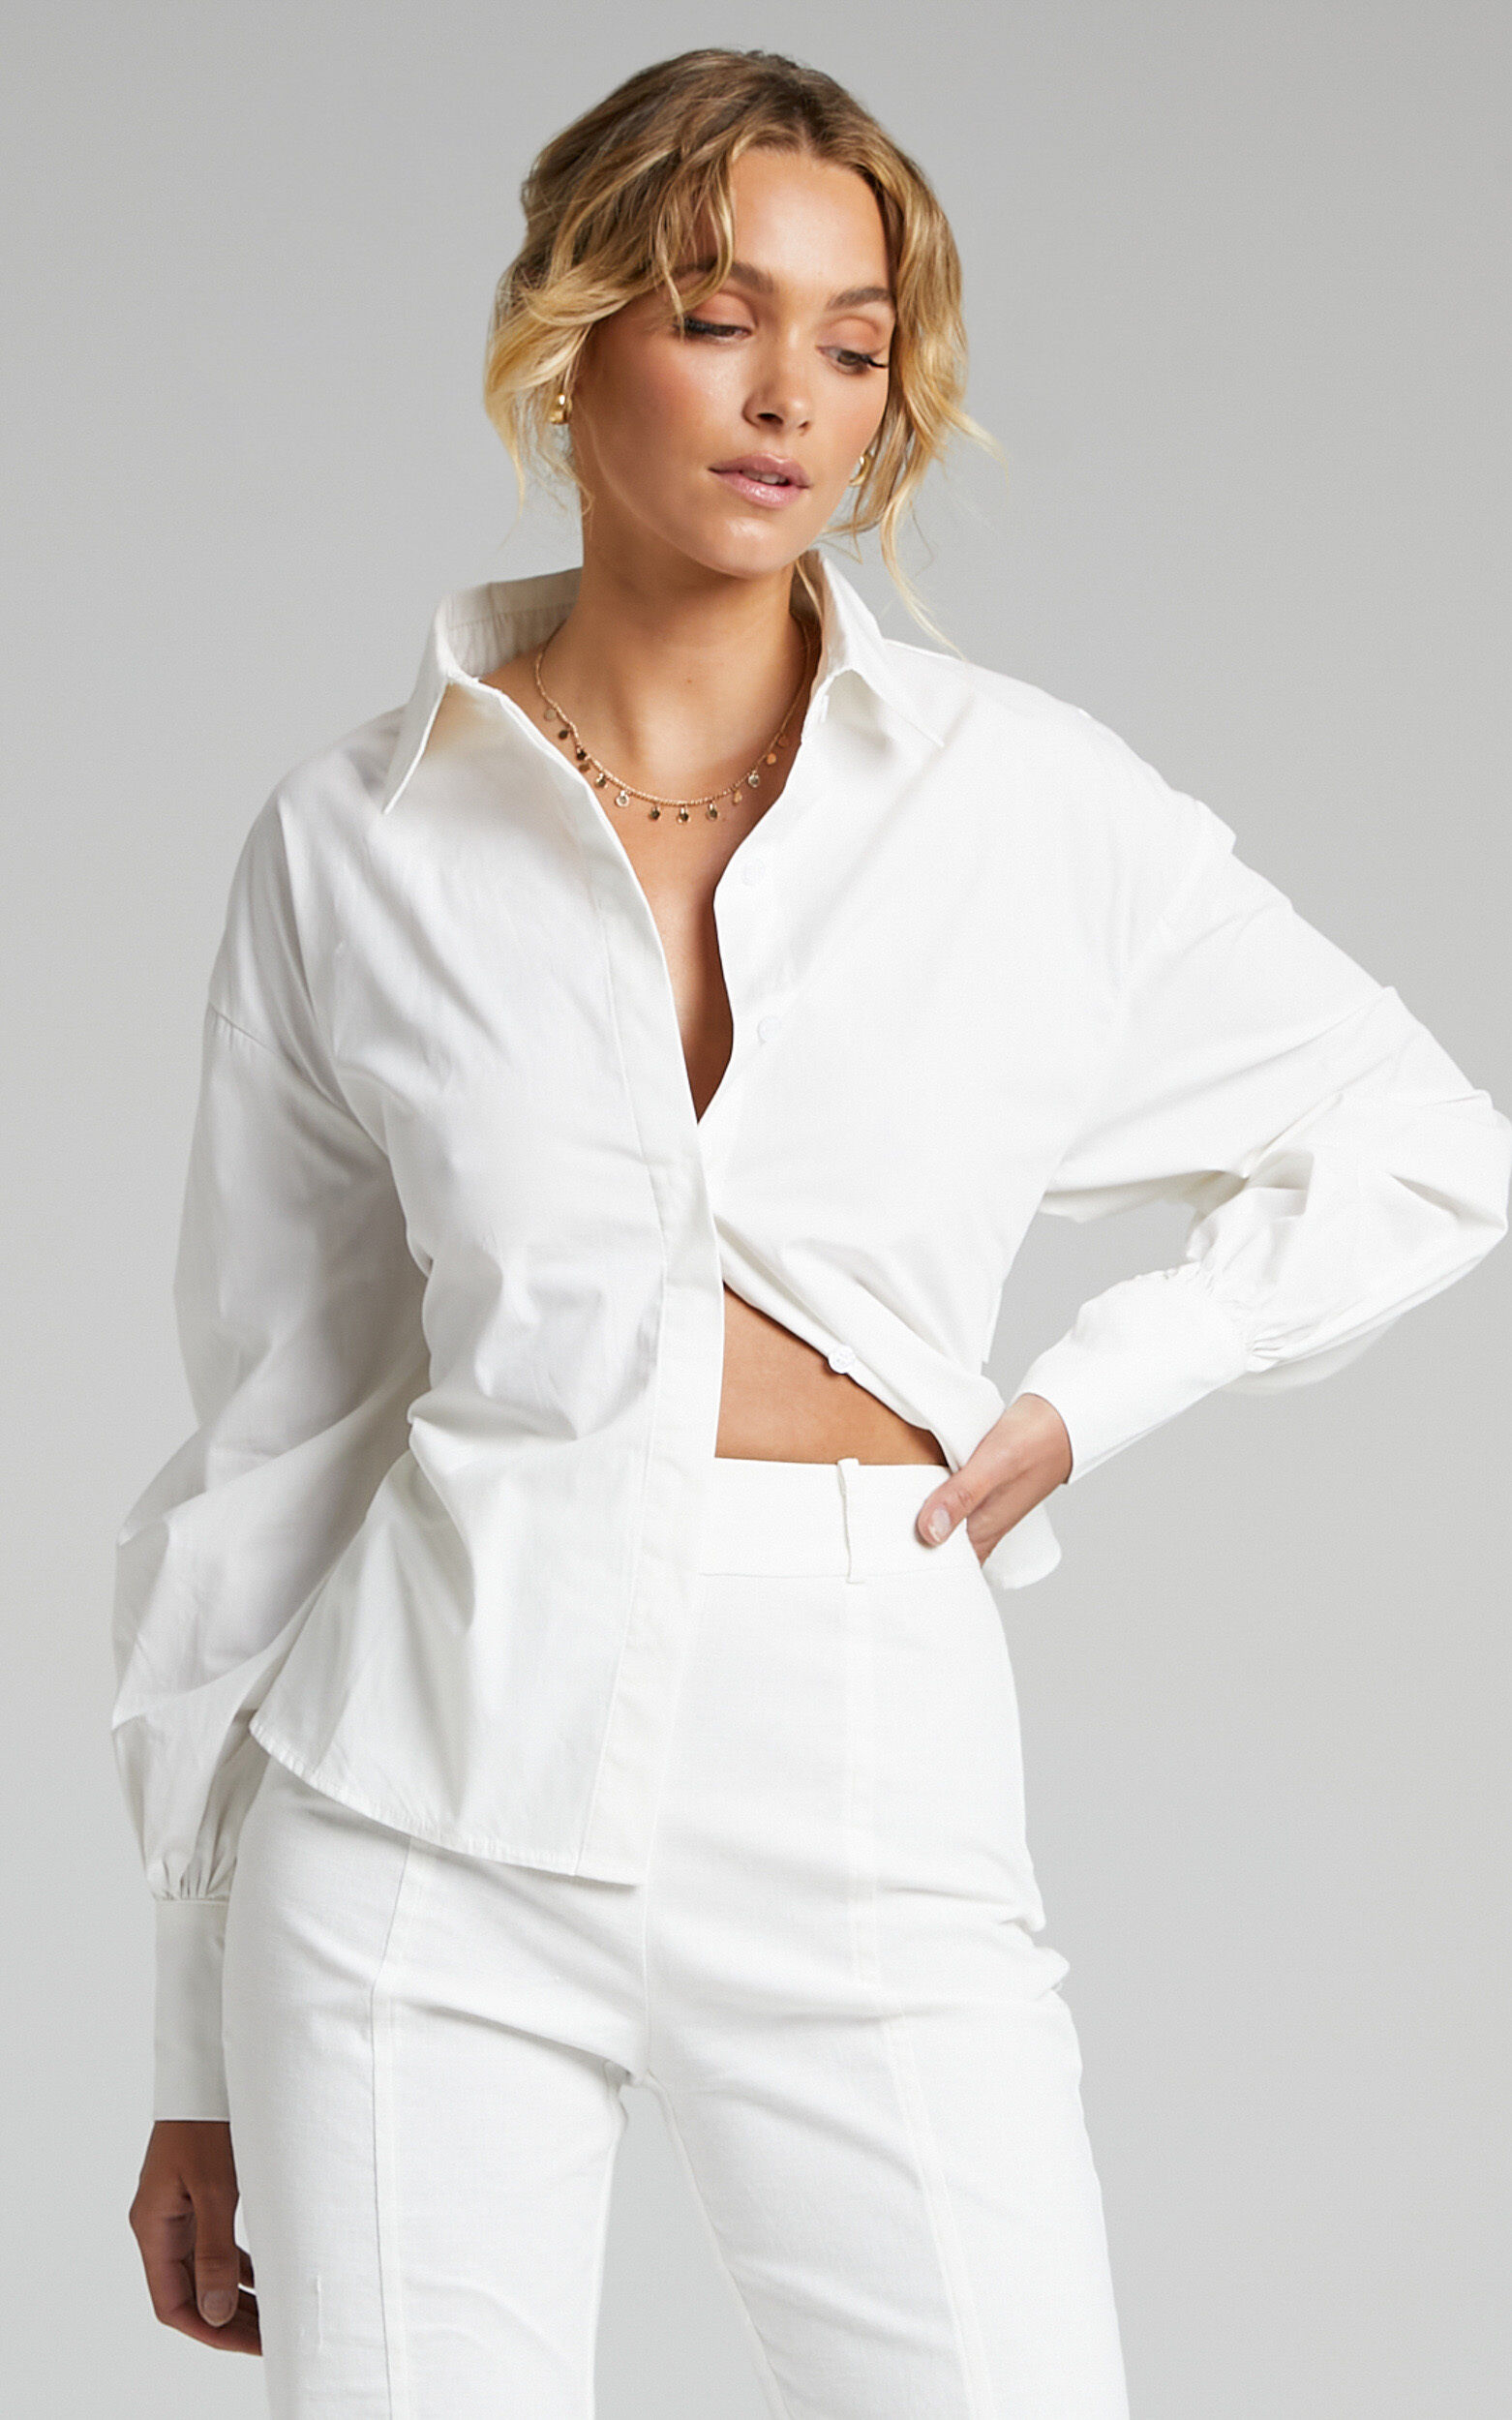 Claudelle Cotton Collared Tie Back Shirt in White - 06, WHT1, super-hi-res image number null